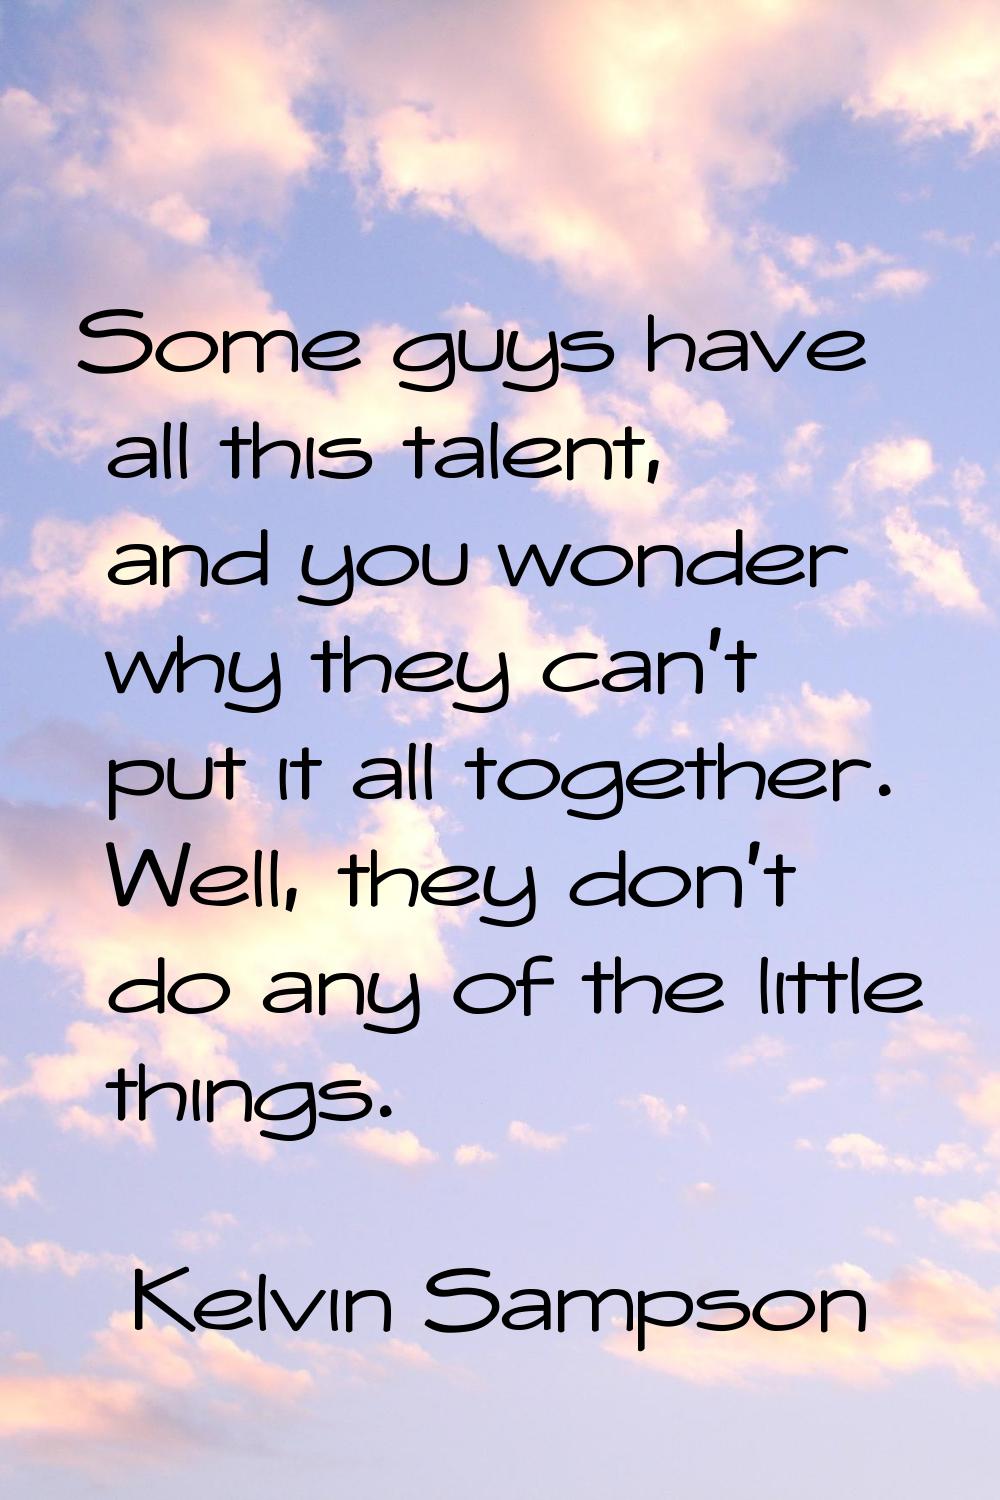 Some guys have all this talent, and you wonder why they can't put it all together. Well, they don't